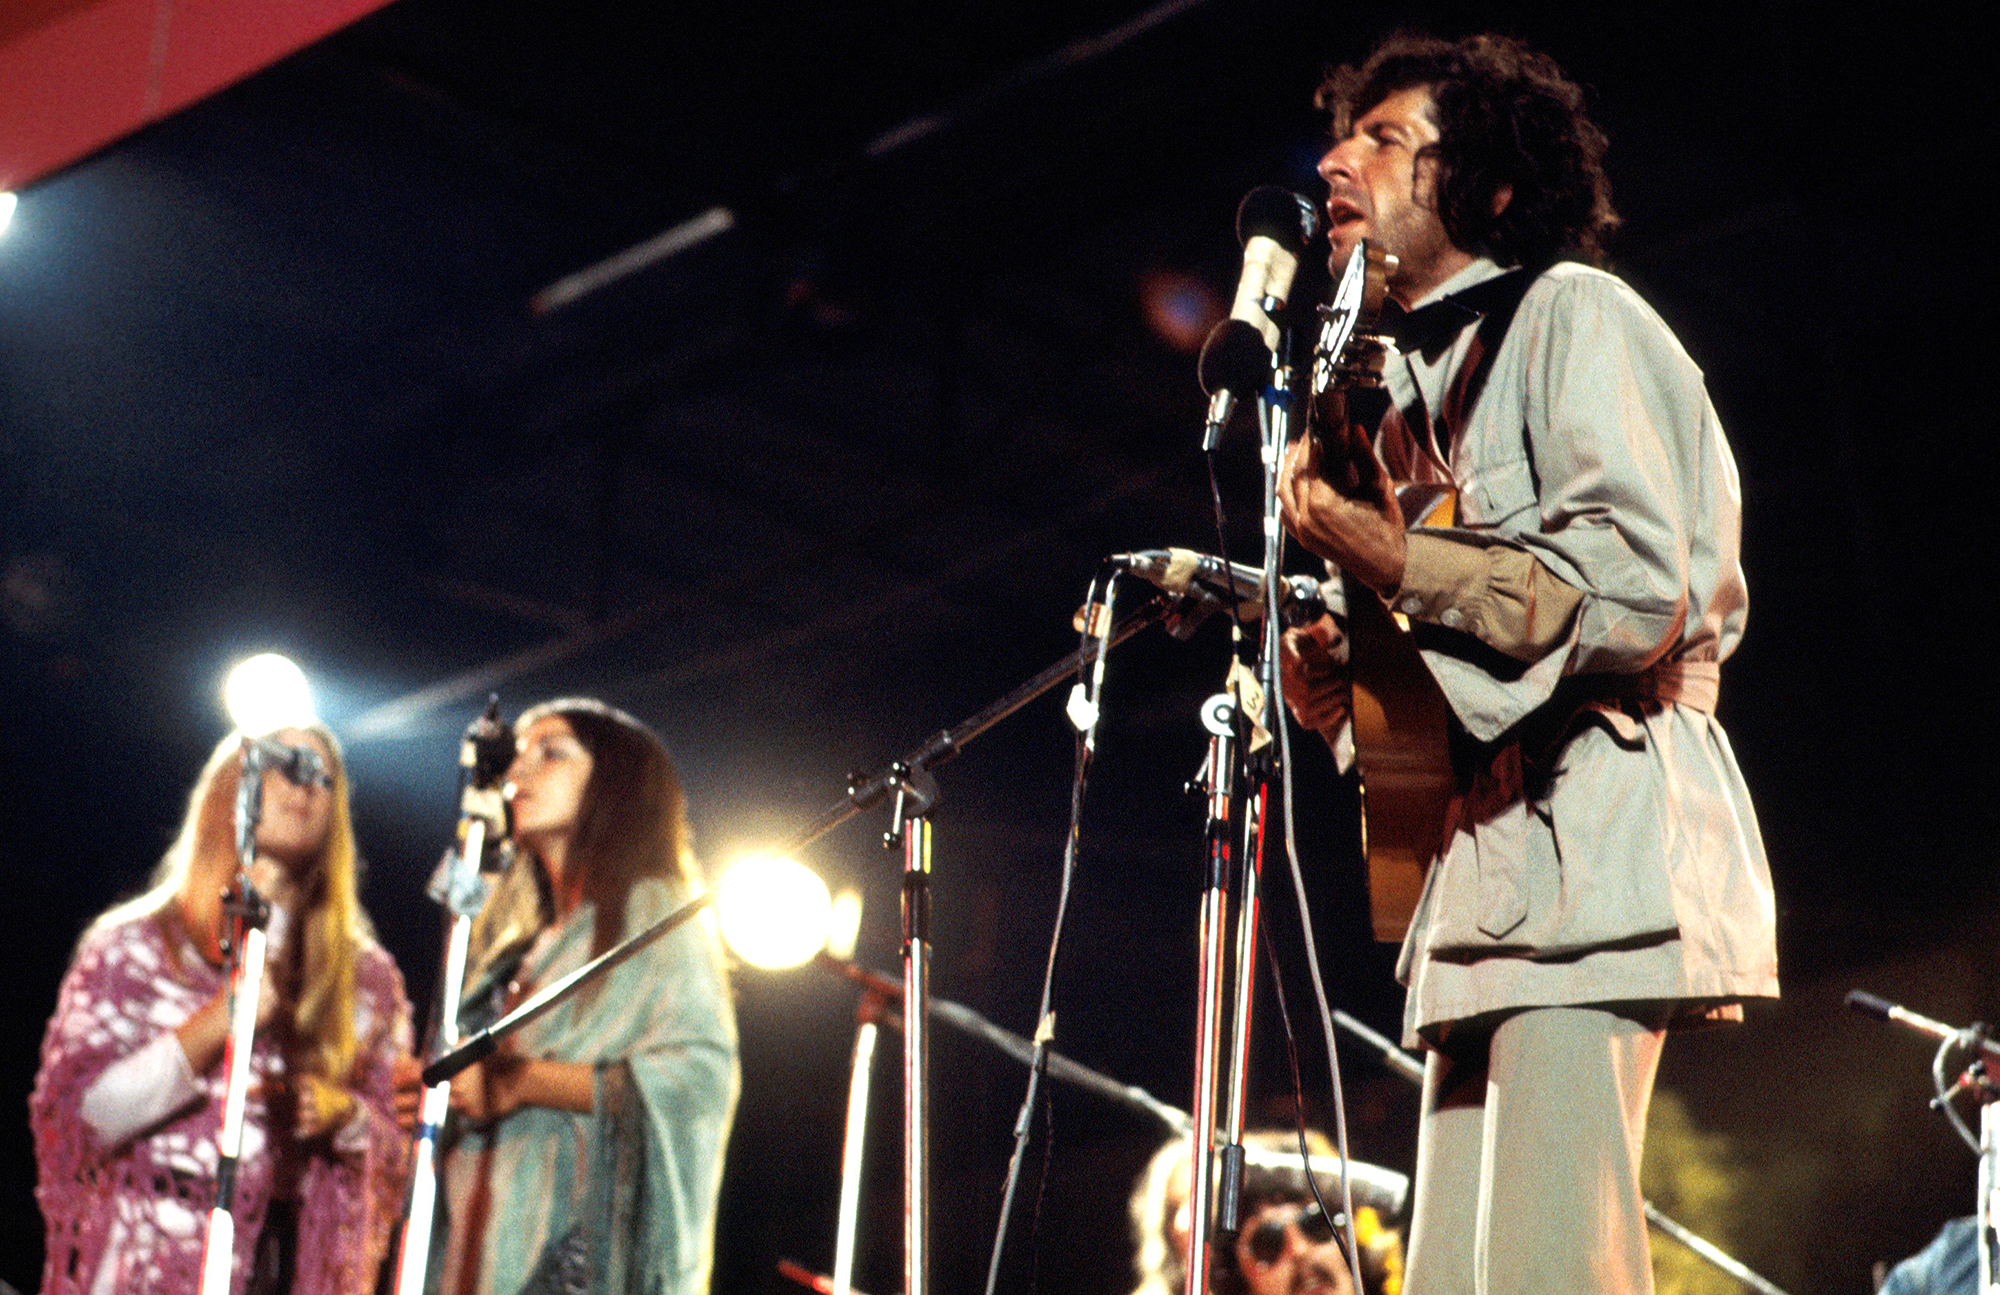 Leonard Cohen performs at the Isle Of Wight Festival, on Aug. 30 1970.